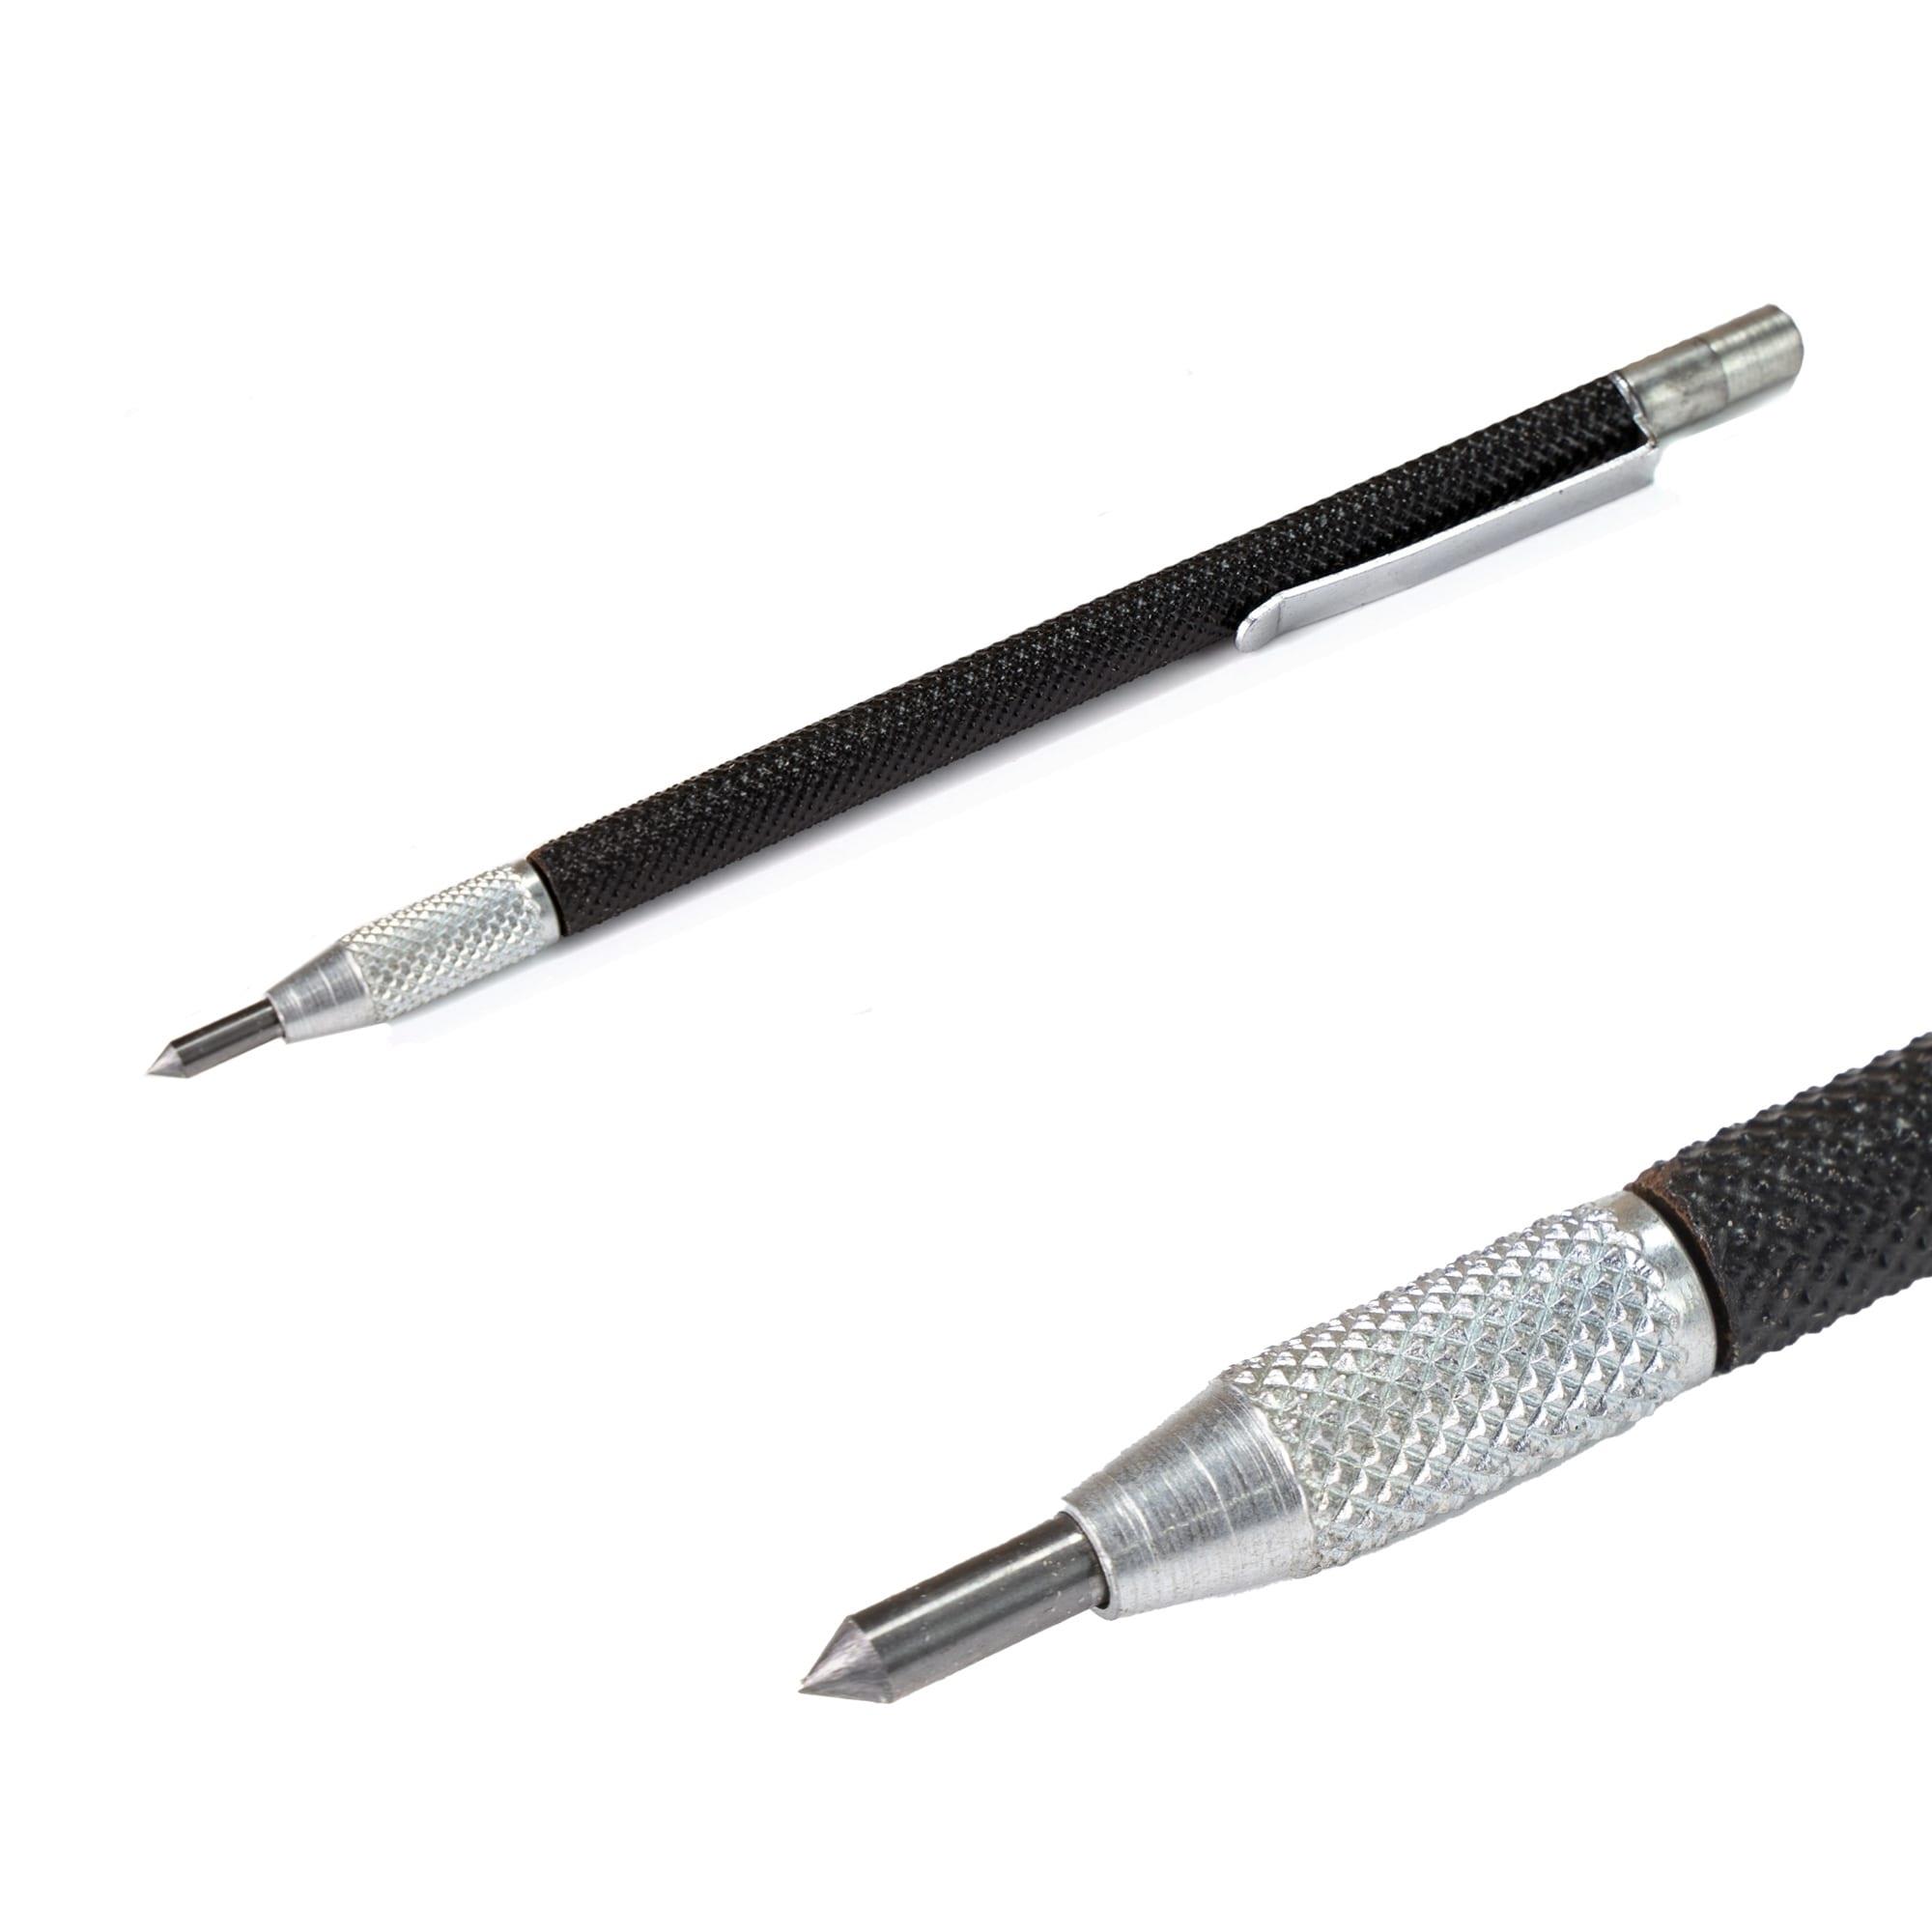 Pen Style Tungsten Carbide Steel Scriber With Magnetic Pick Up And Pocket Clip